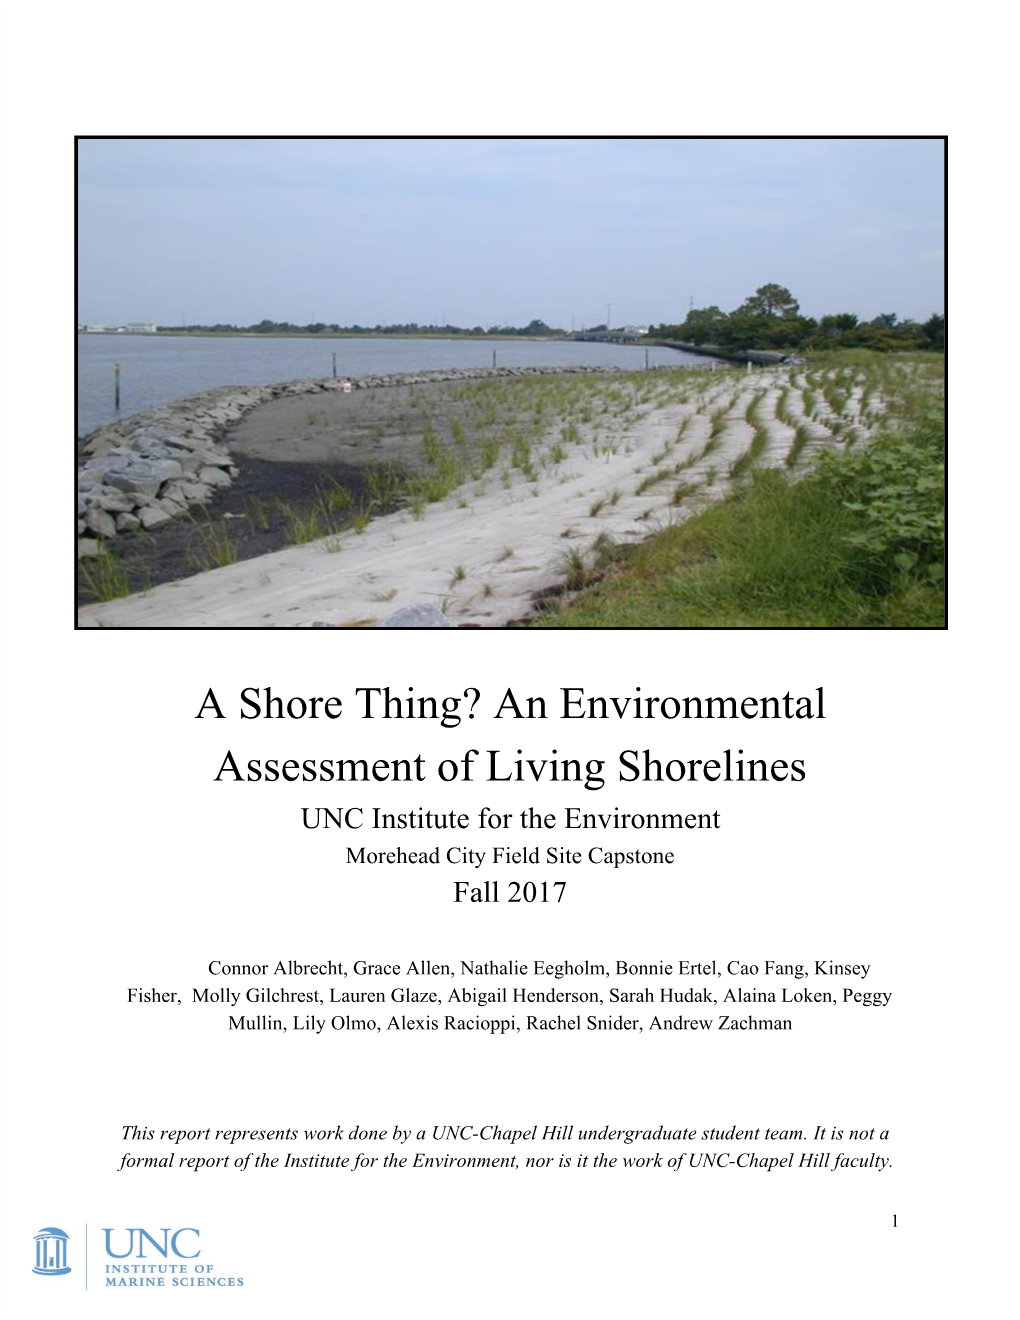 A Shore Thing? an Environmental Assessment of Living Shorelines UNC Institute for the Environment Morehead City Field Site Capstone Fall 2017